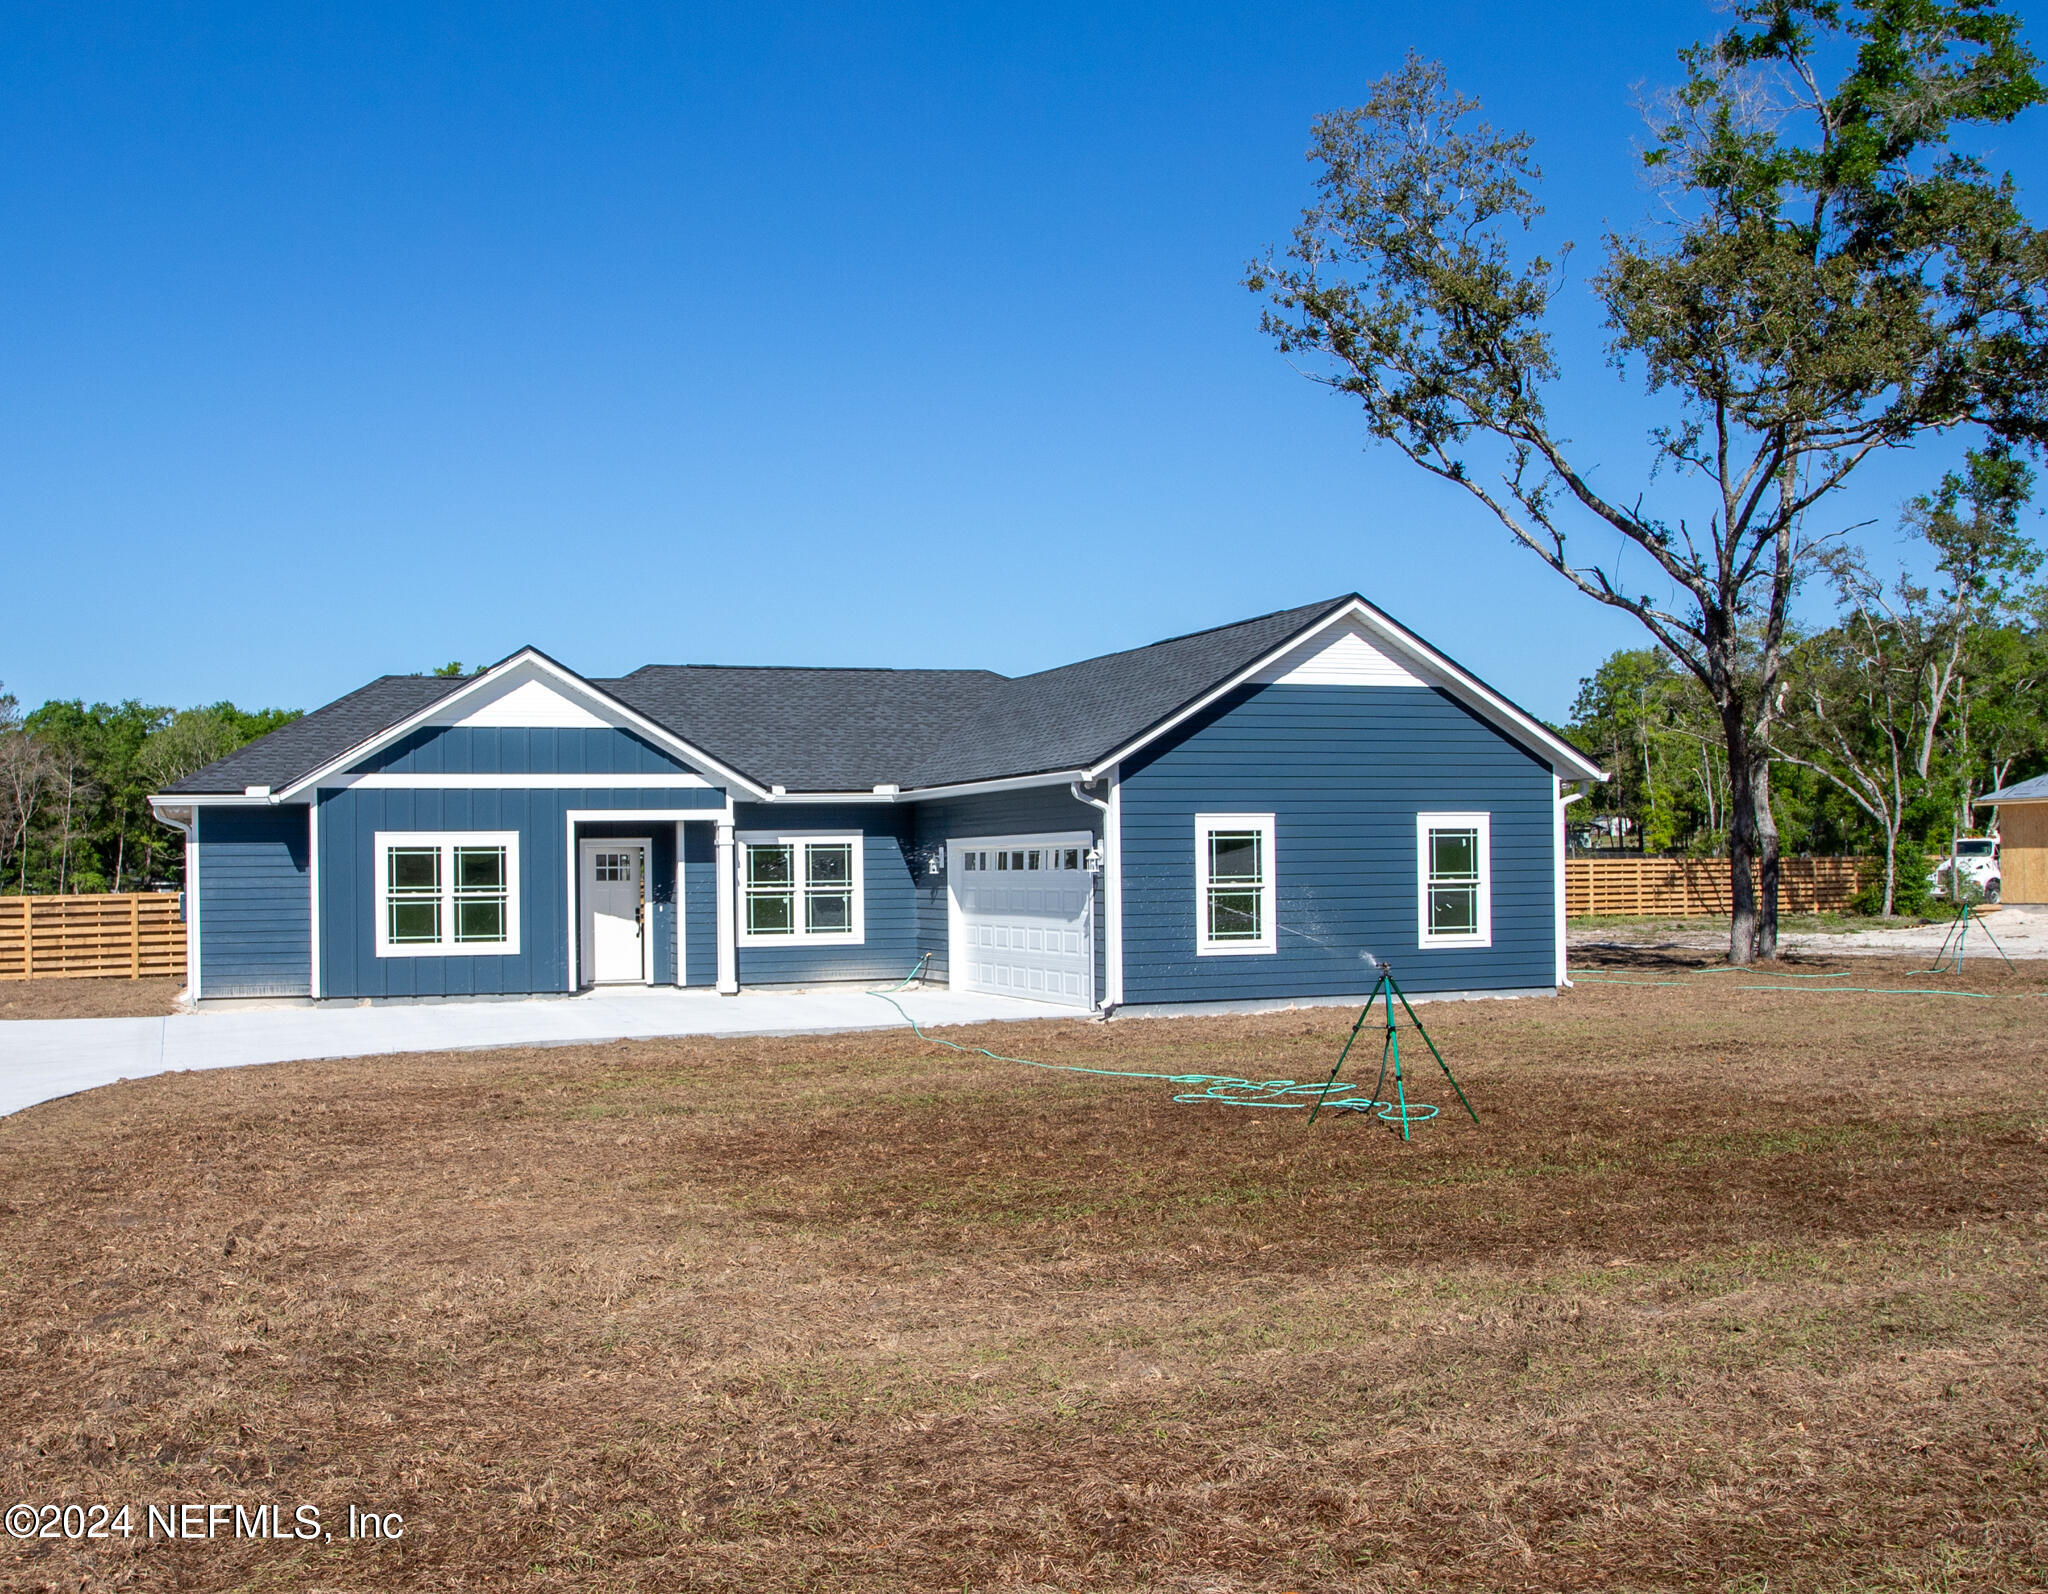 Keystone Heights, FL home for sale located at 4940 SE 9th Place, Keystone Heights, FL 32656